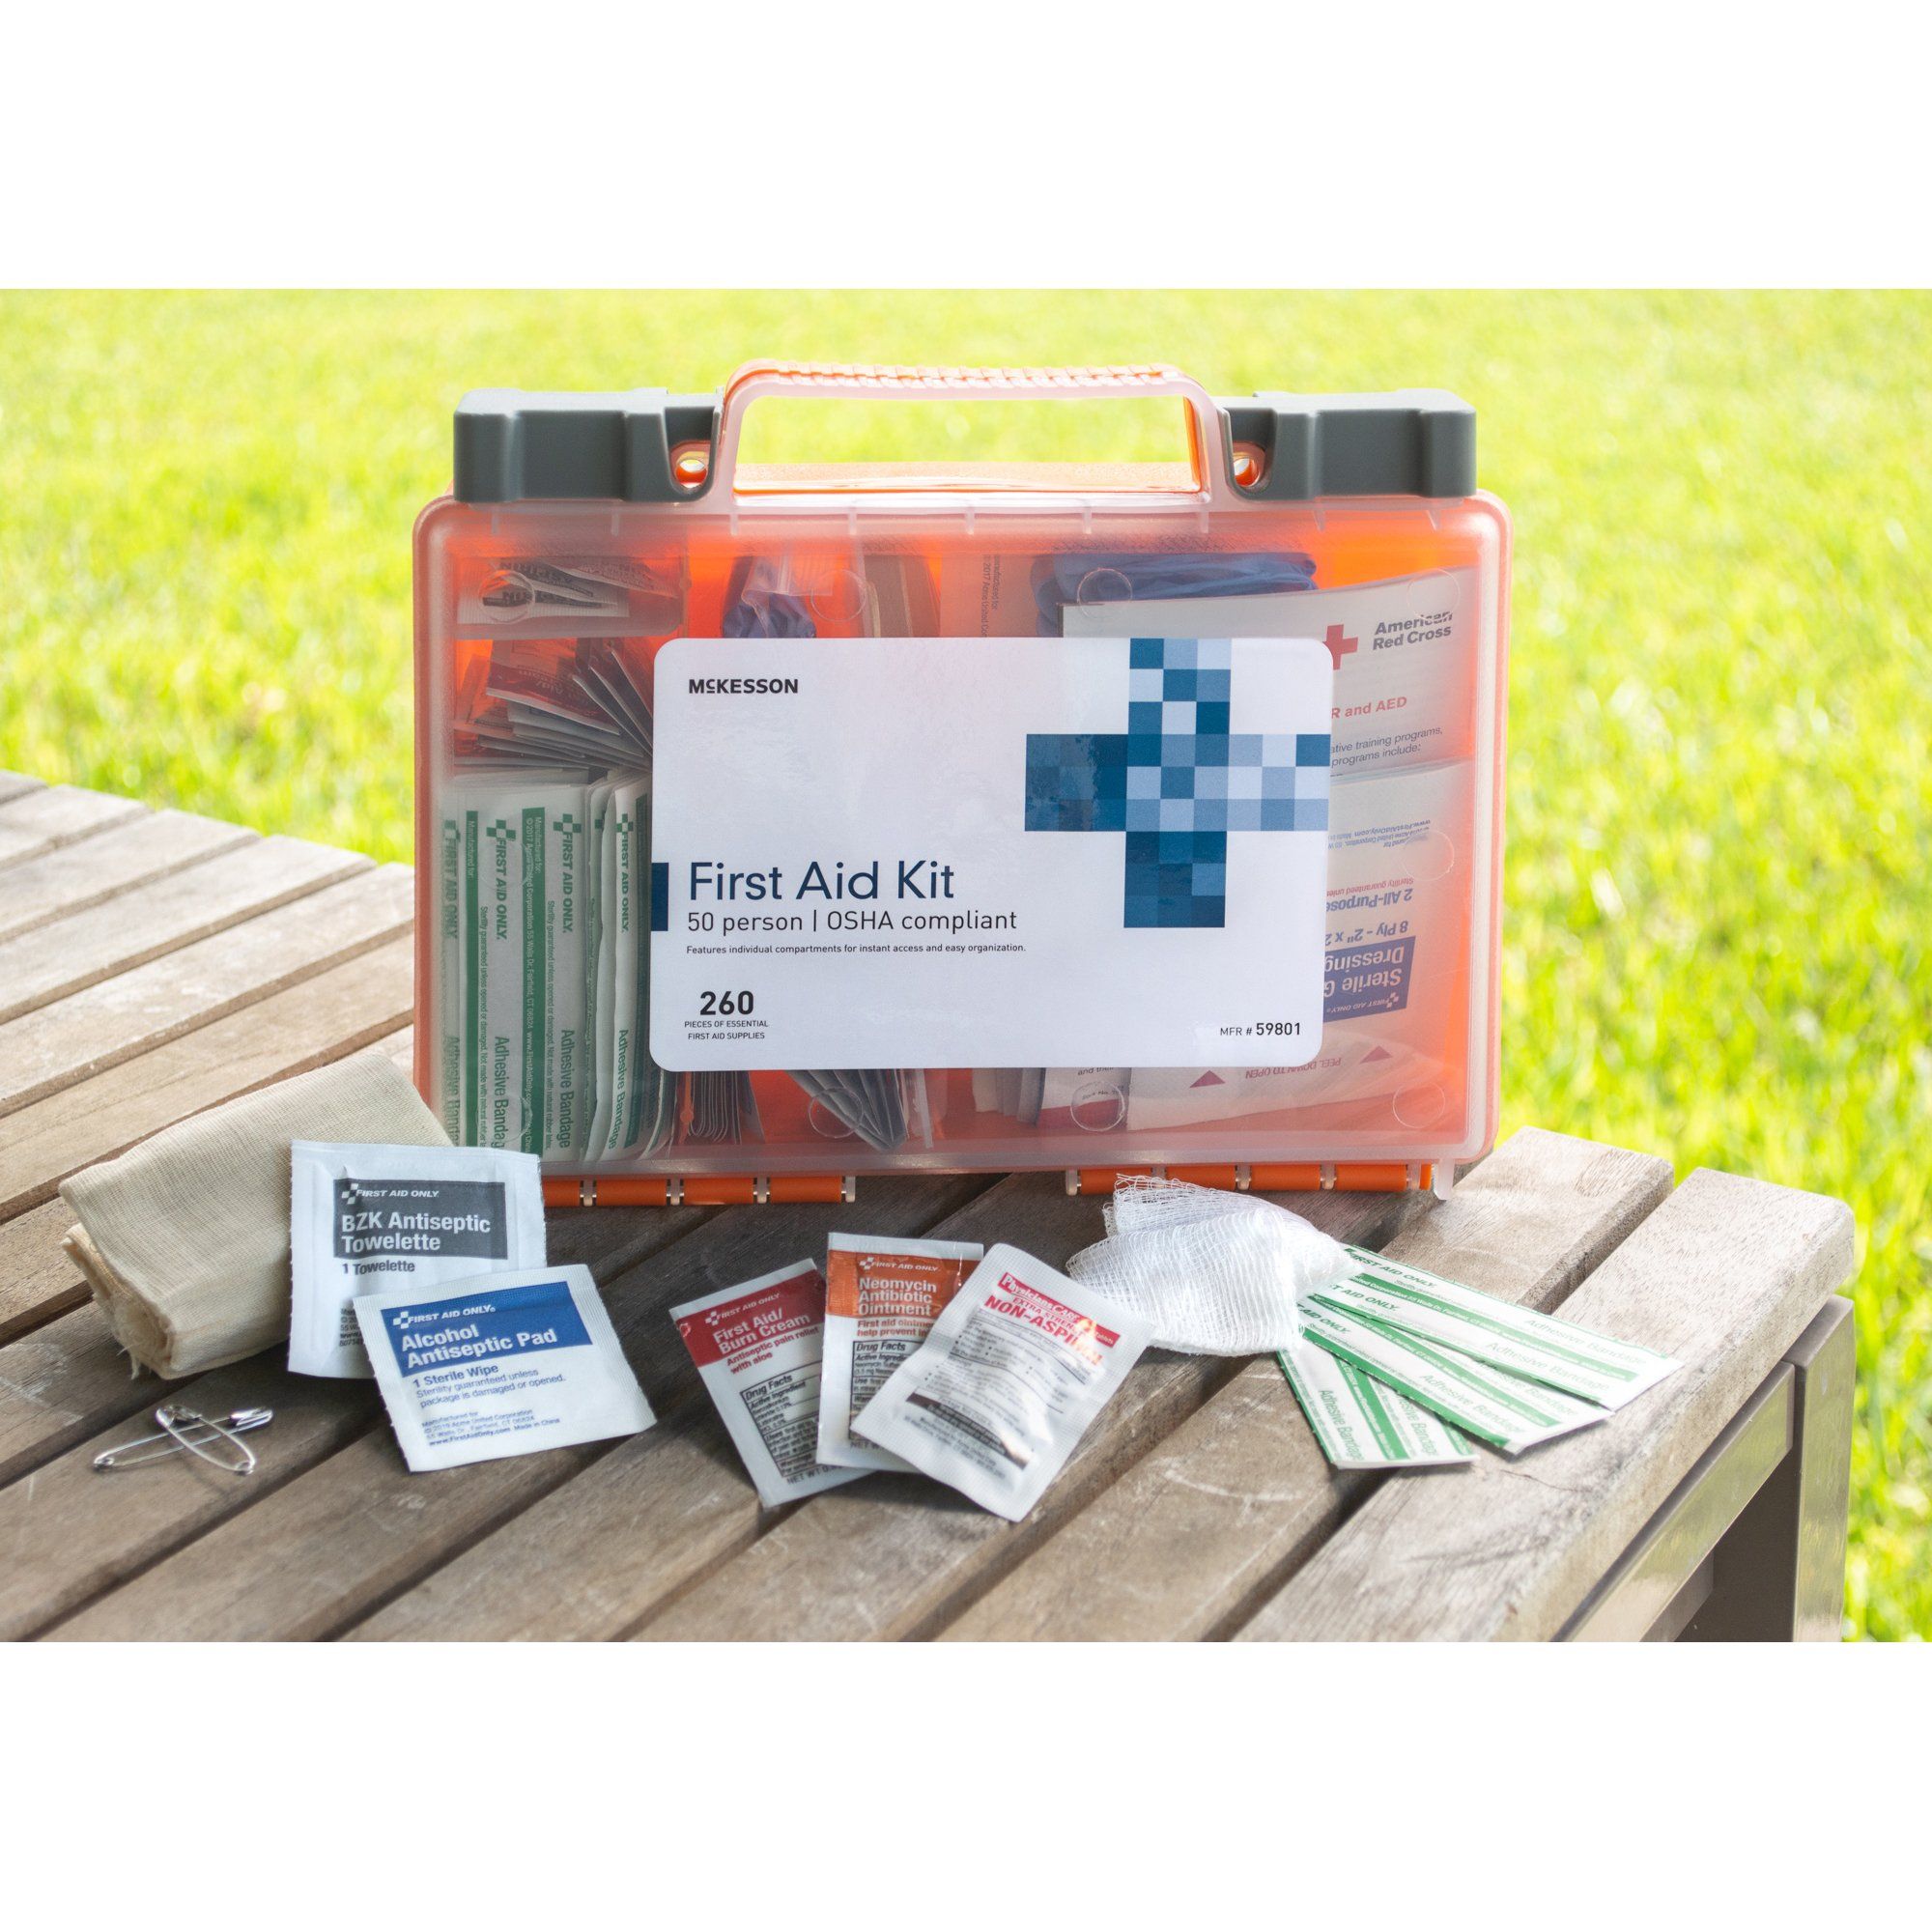 McKesson First Aid Kit 50 Person - 260 pieces